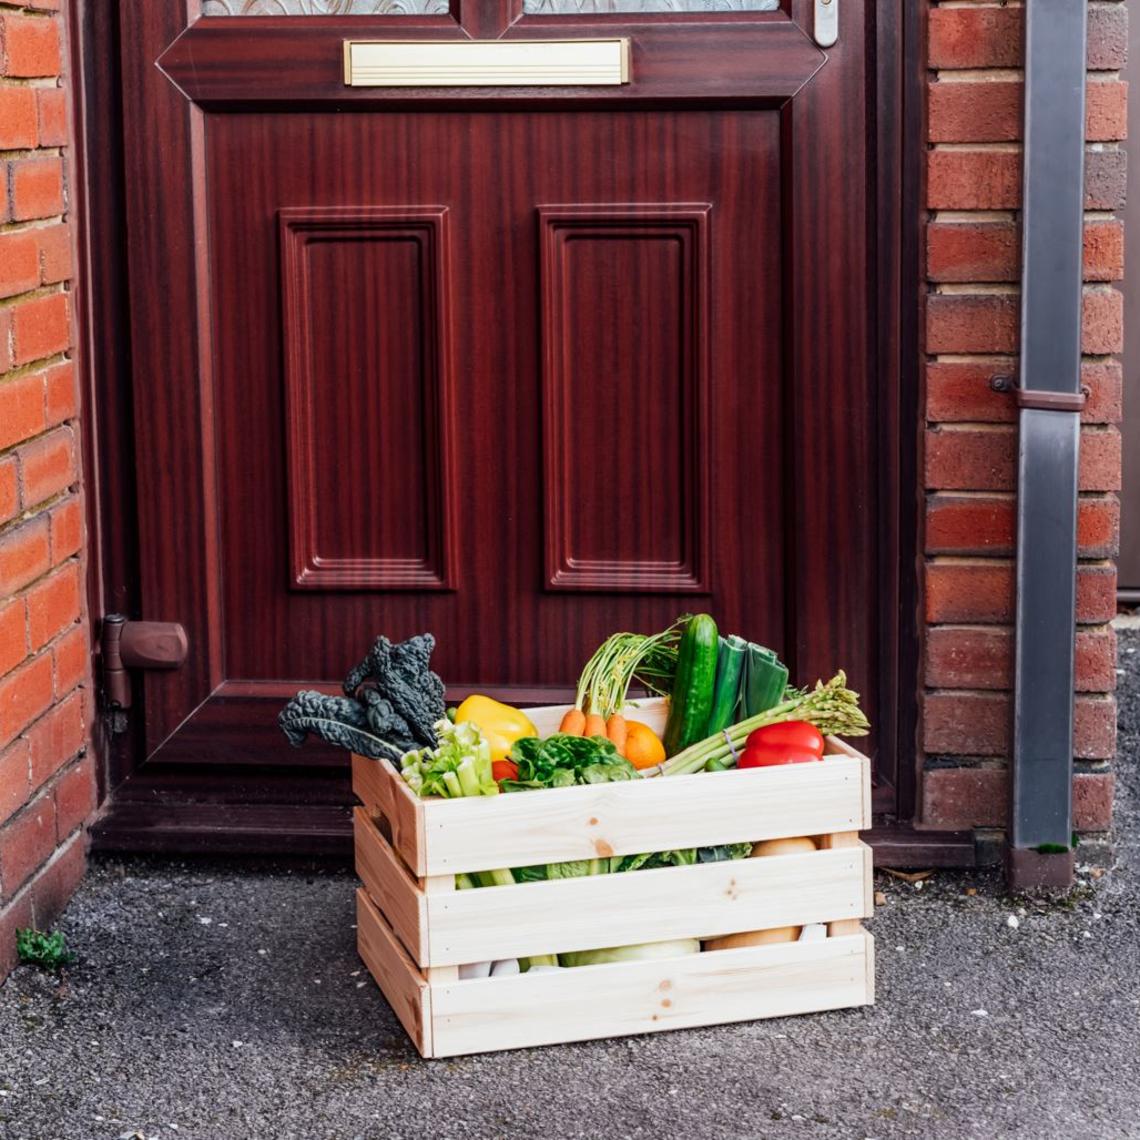 wooden crate with vegetables in it sitting on pavement in front of dark wooden door